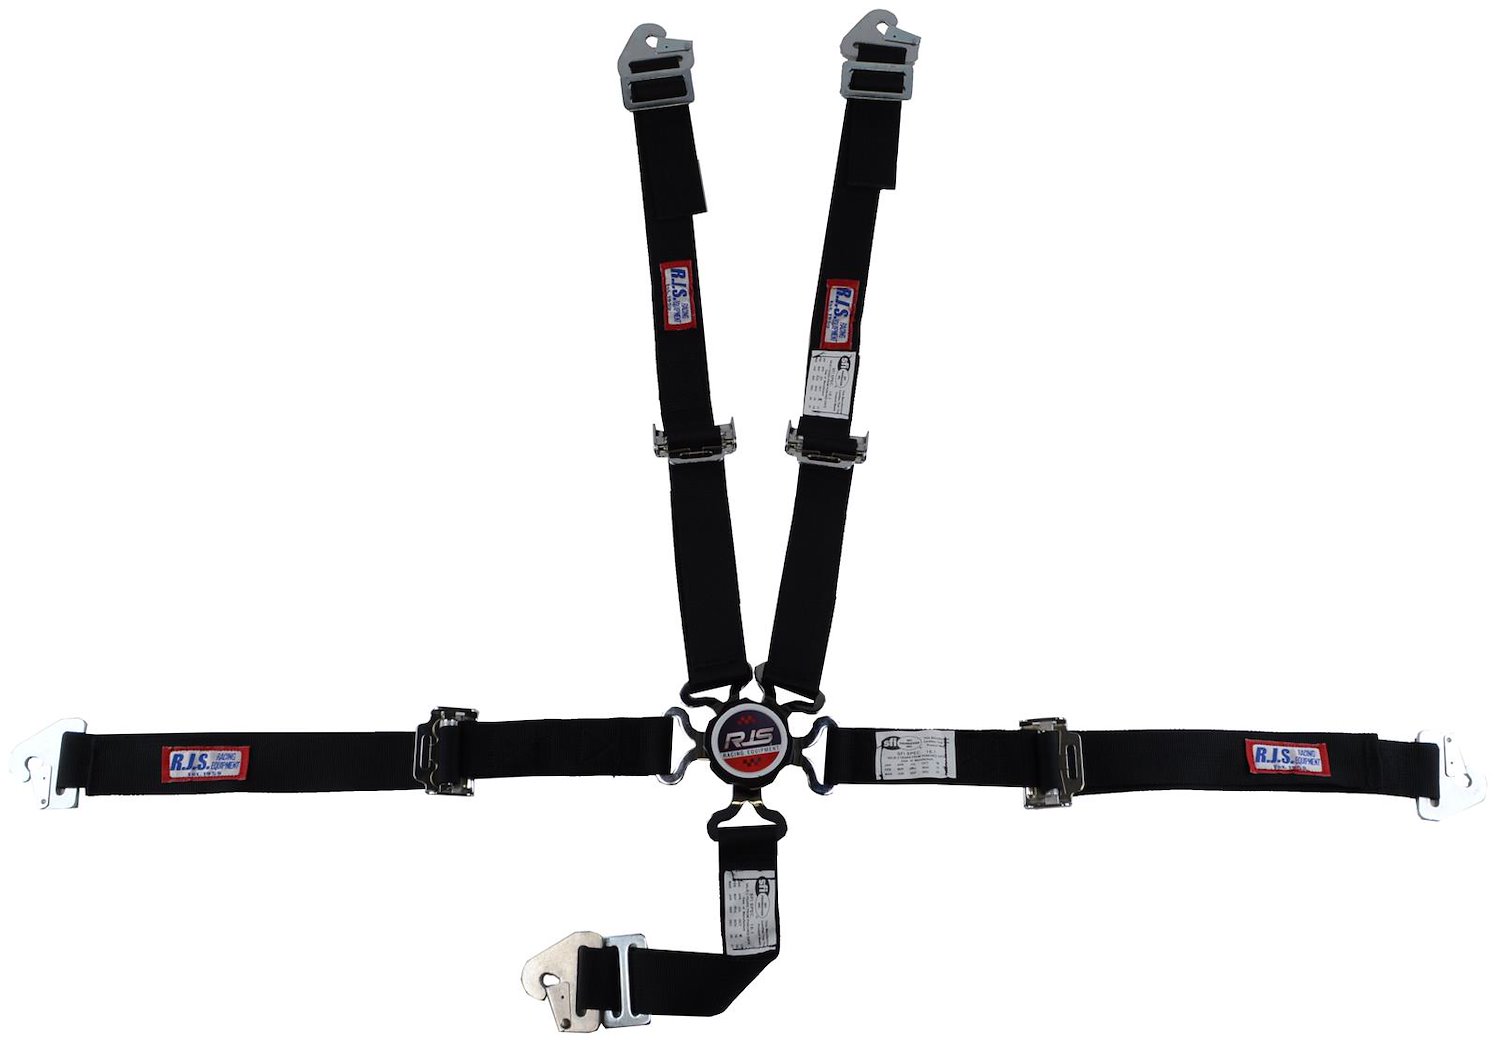 SFI 16.1 CAM-LOCK HARNESS 2 PULL DOWN Lap Belt 2 Shoulder Harness Individual FLOOR Mount 2 SINGLE Sub ALL WRAP/BOLT ENDS YELLOW